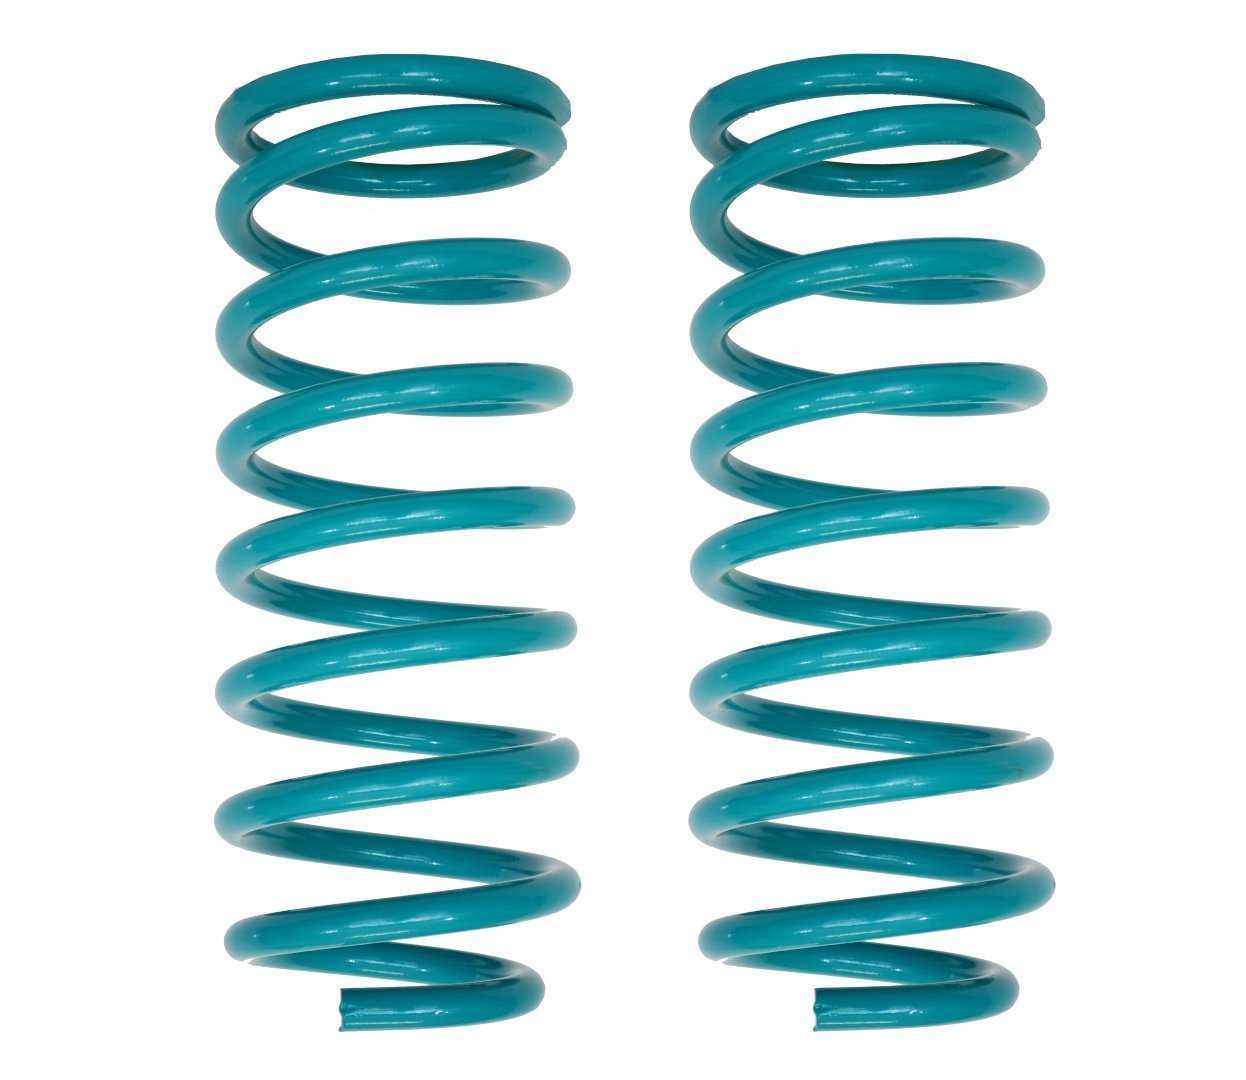 Dobinsons Scratch and Dent Rear Variable Rate Coil Springs for Toyota 4Runner and FJ Cruiser (without KDSS)(C59-675V)